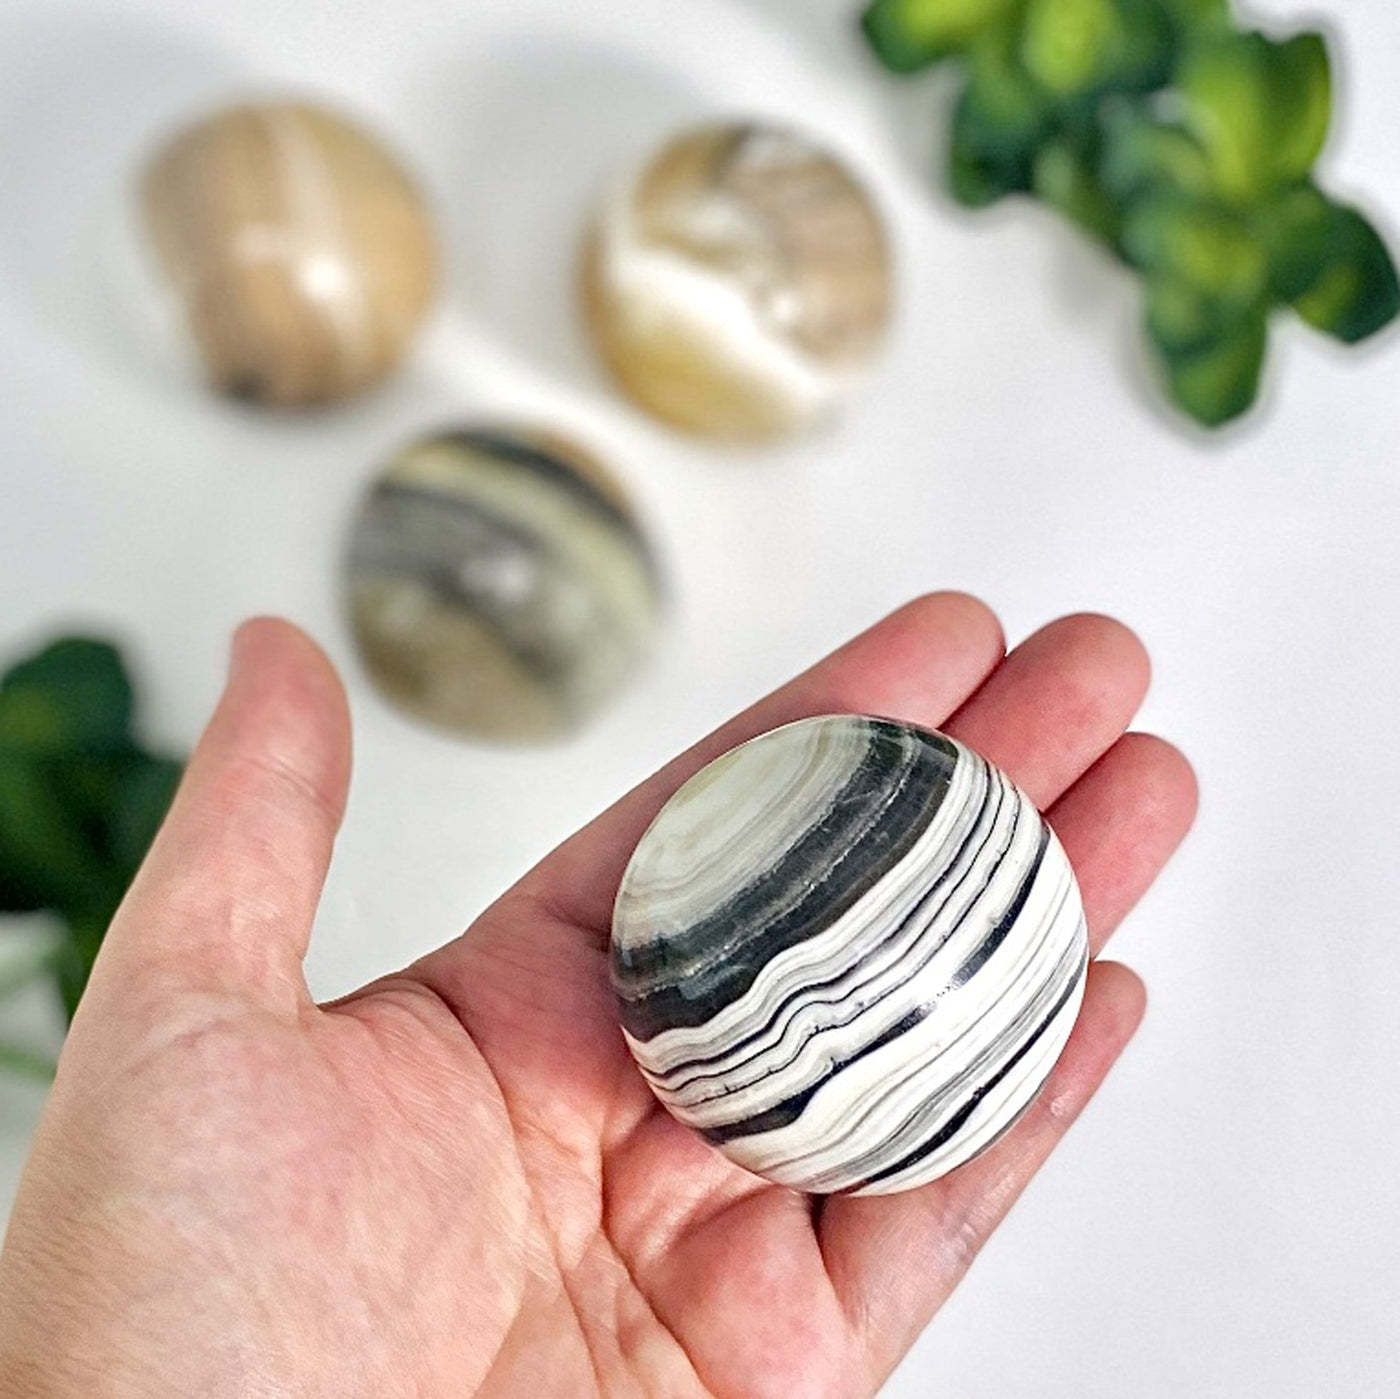 Zebra Onyx 5cm Polished Sphere in hand for size reference